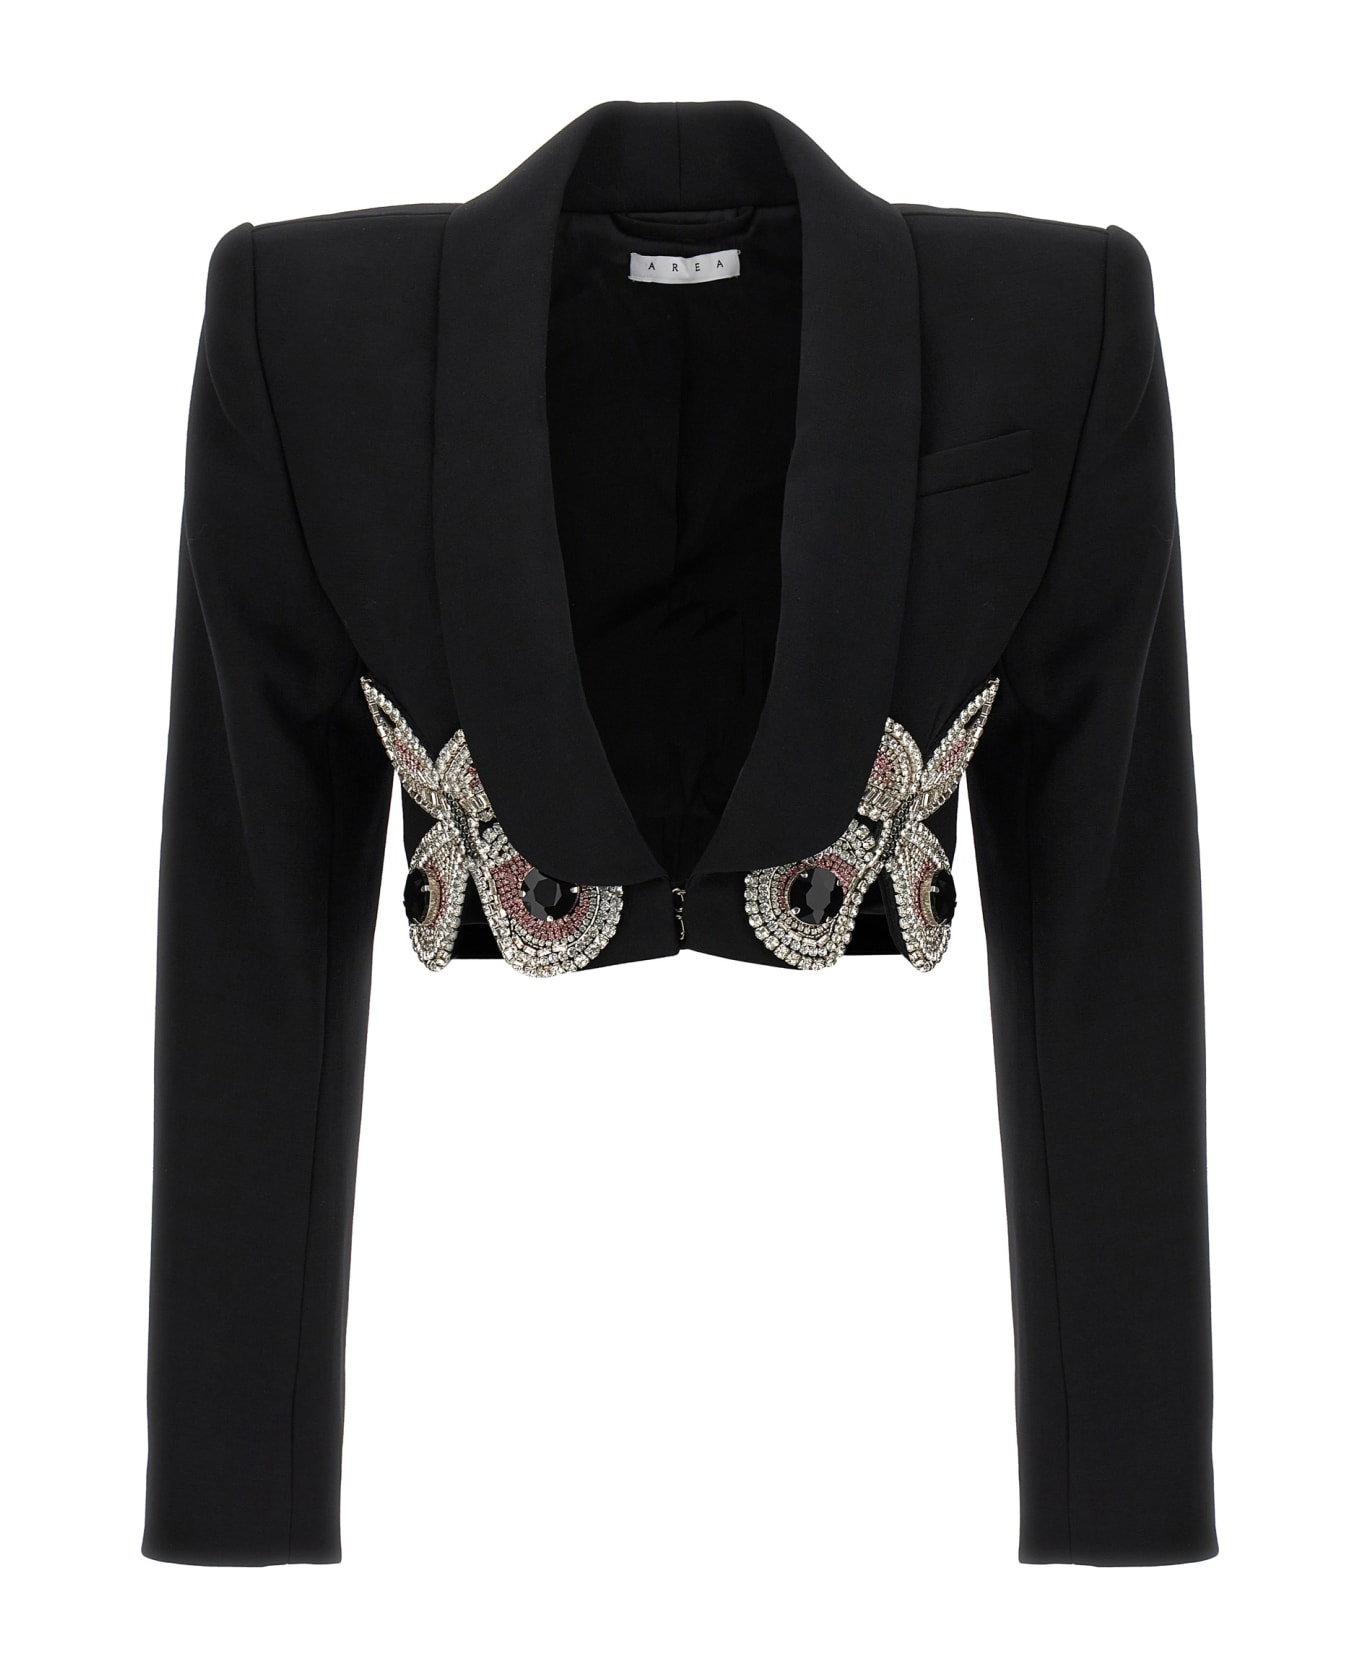 AREA Blazer 'embroidered Butterfly Cropped' - Black   ブレザー